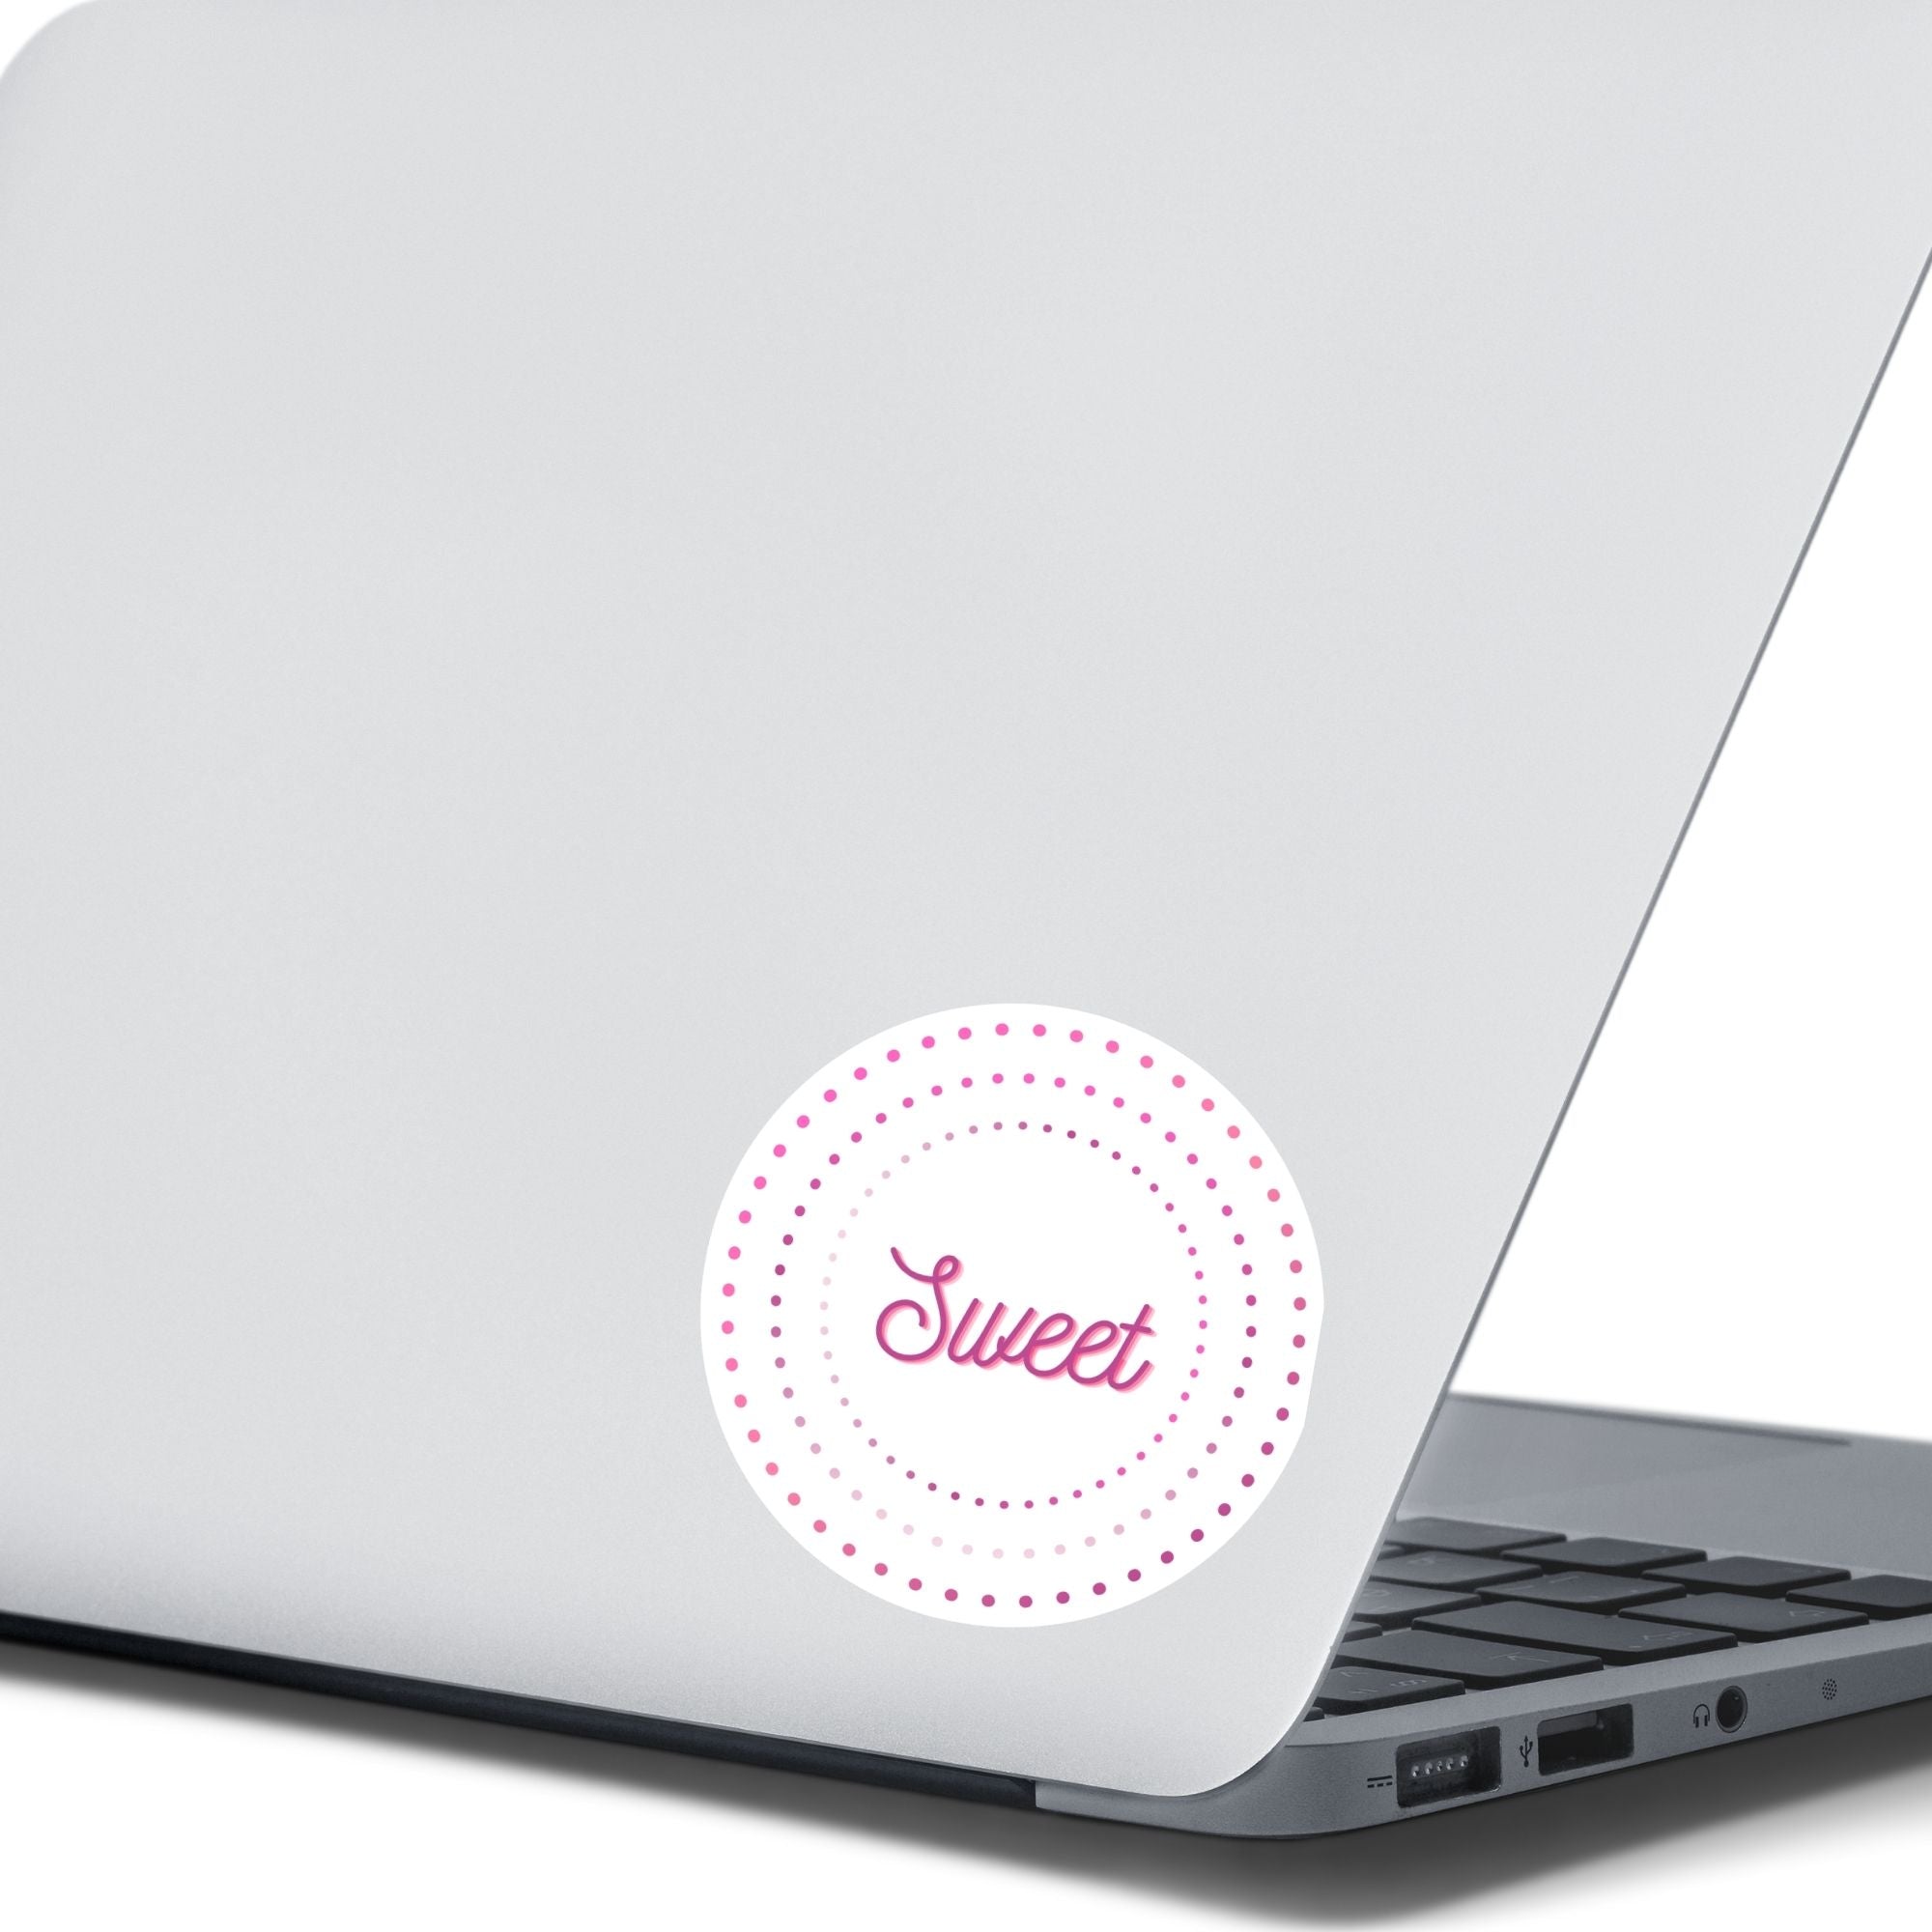 This round individual die-cut sticker is Sweet! It features the word Sweet in the center surrounded by pink and purple circular dots. This makes a great gift for anyone you're sweet on! This image shows the Sweet sticker on the back of an open laptop.